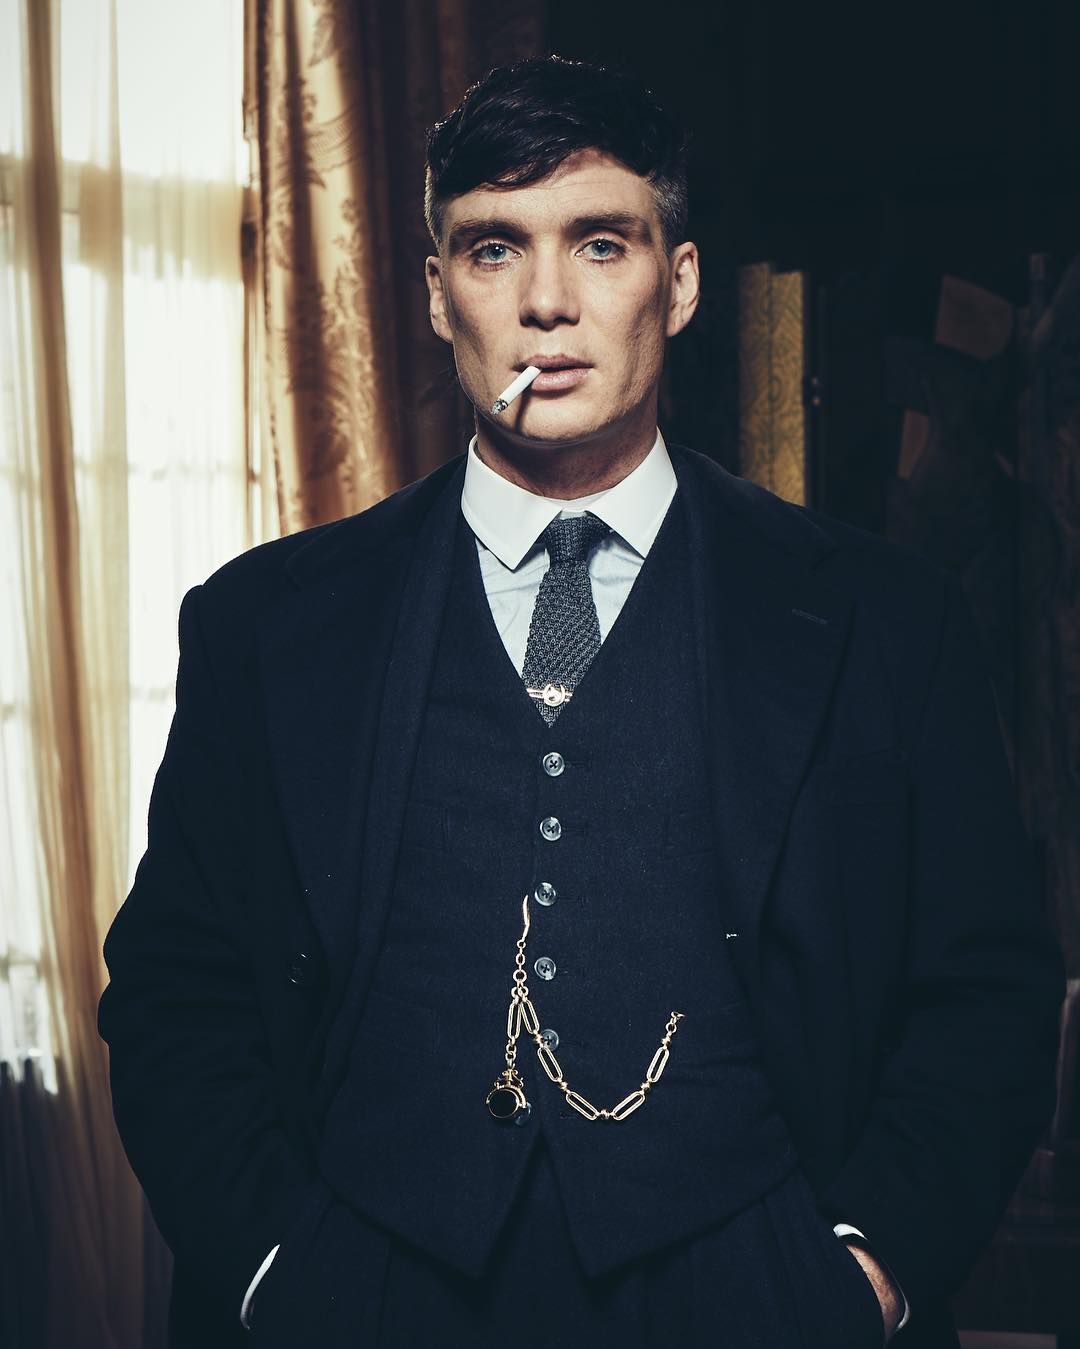 Peaky Blinders: Cillian Murphy Smoked 000 Cigarettes In One Series